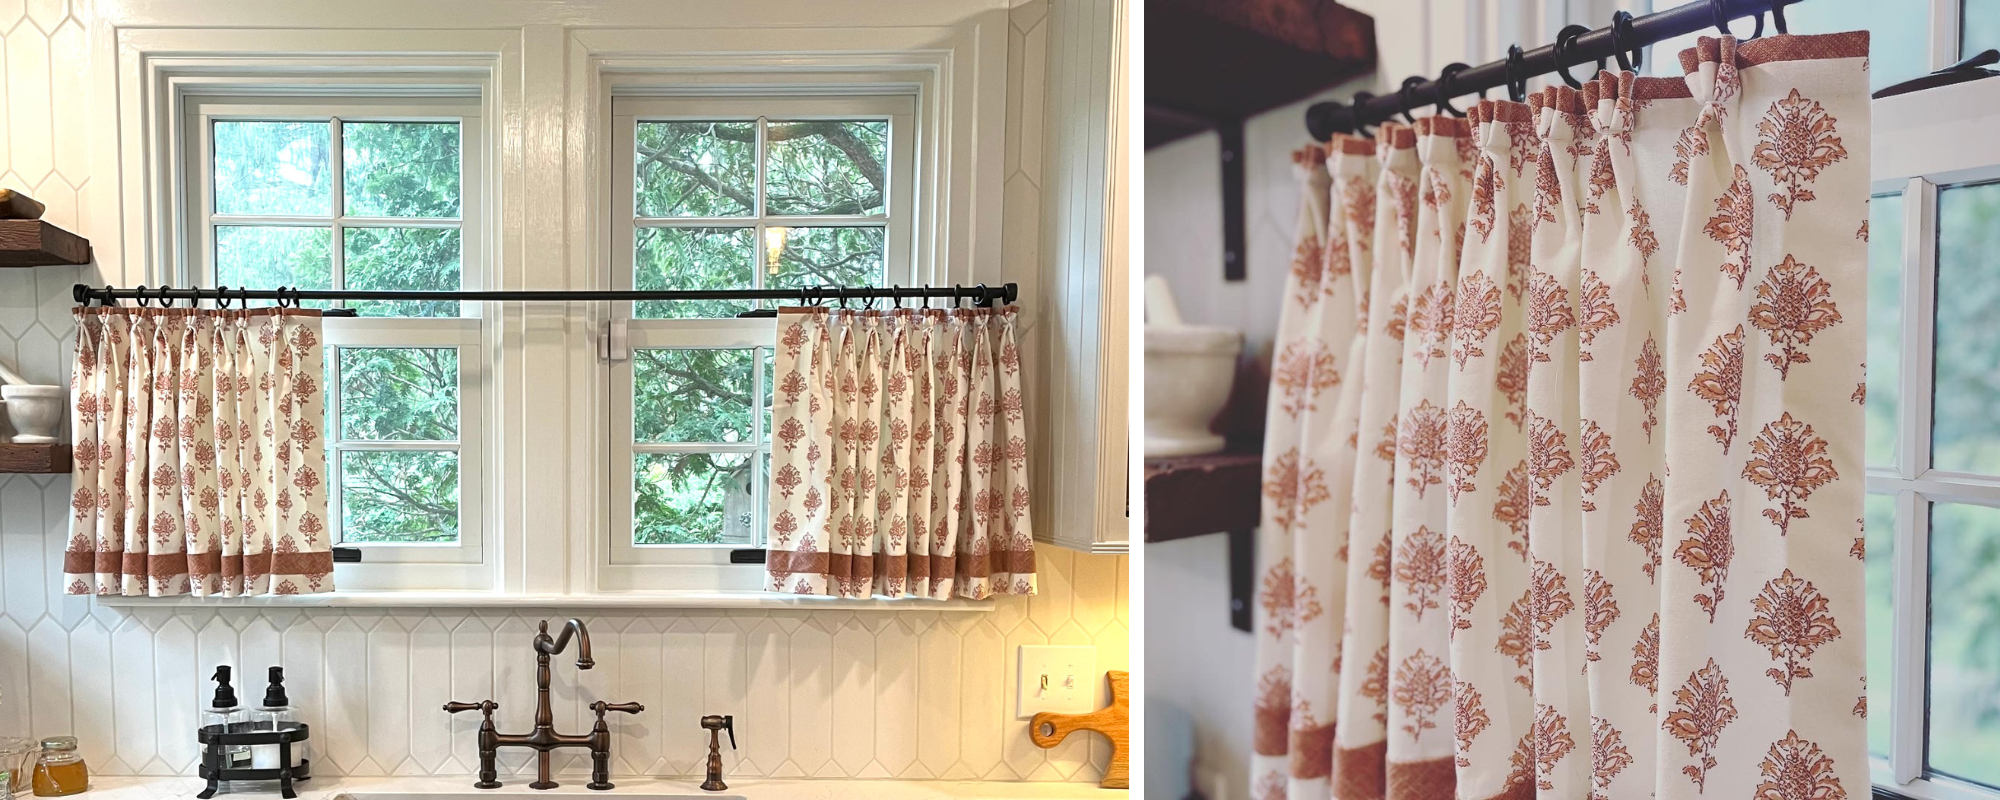 becker-home-boyertown-pa-choosing-custom-window-treatments-cafe-style-farmhouse-kitchen-curtains-personal-interior-design.png